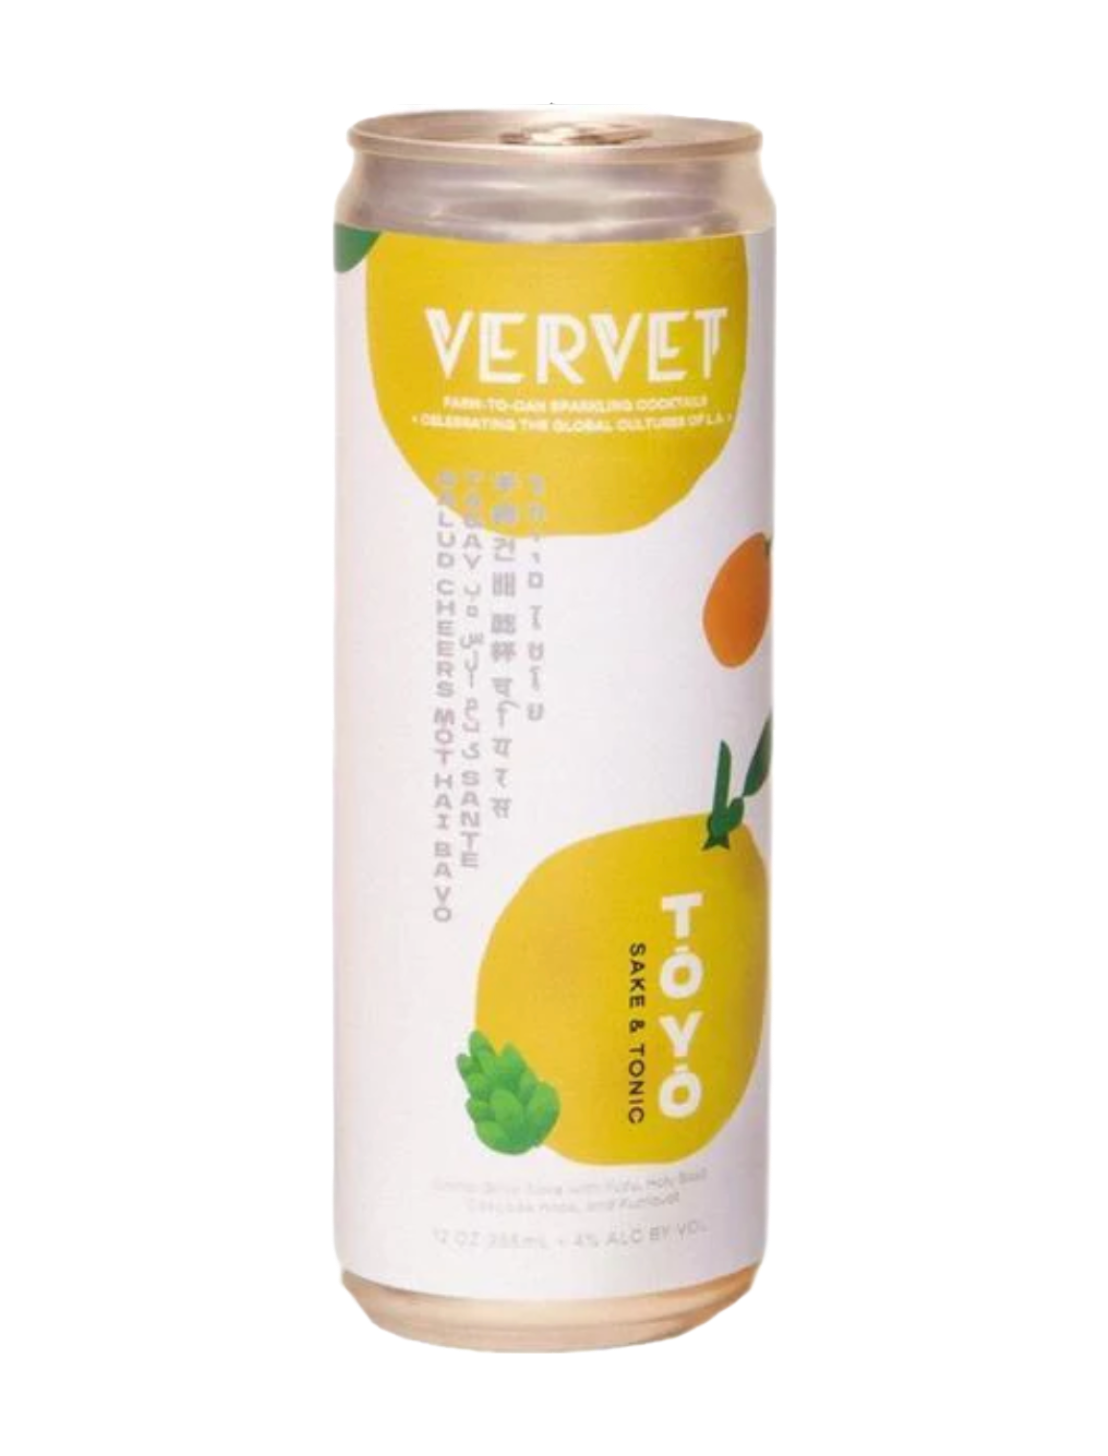 A can of Vervet TOYO Yuzu Sake Tonic in front of a white background